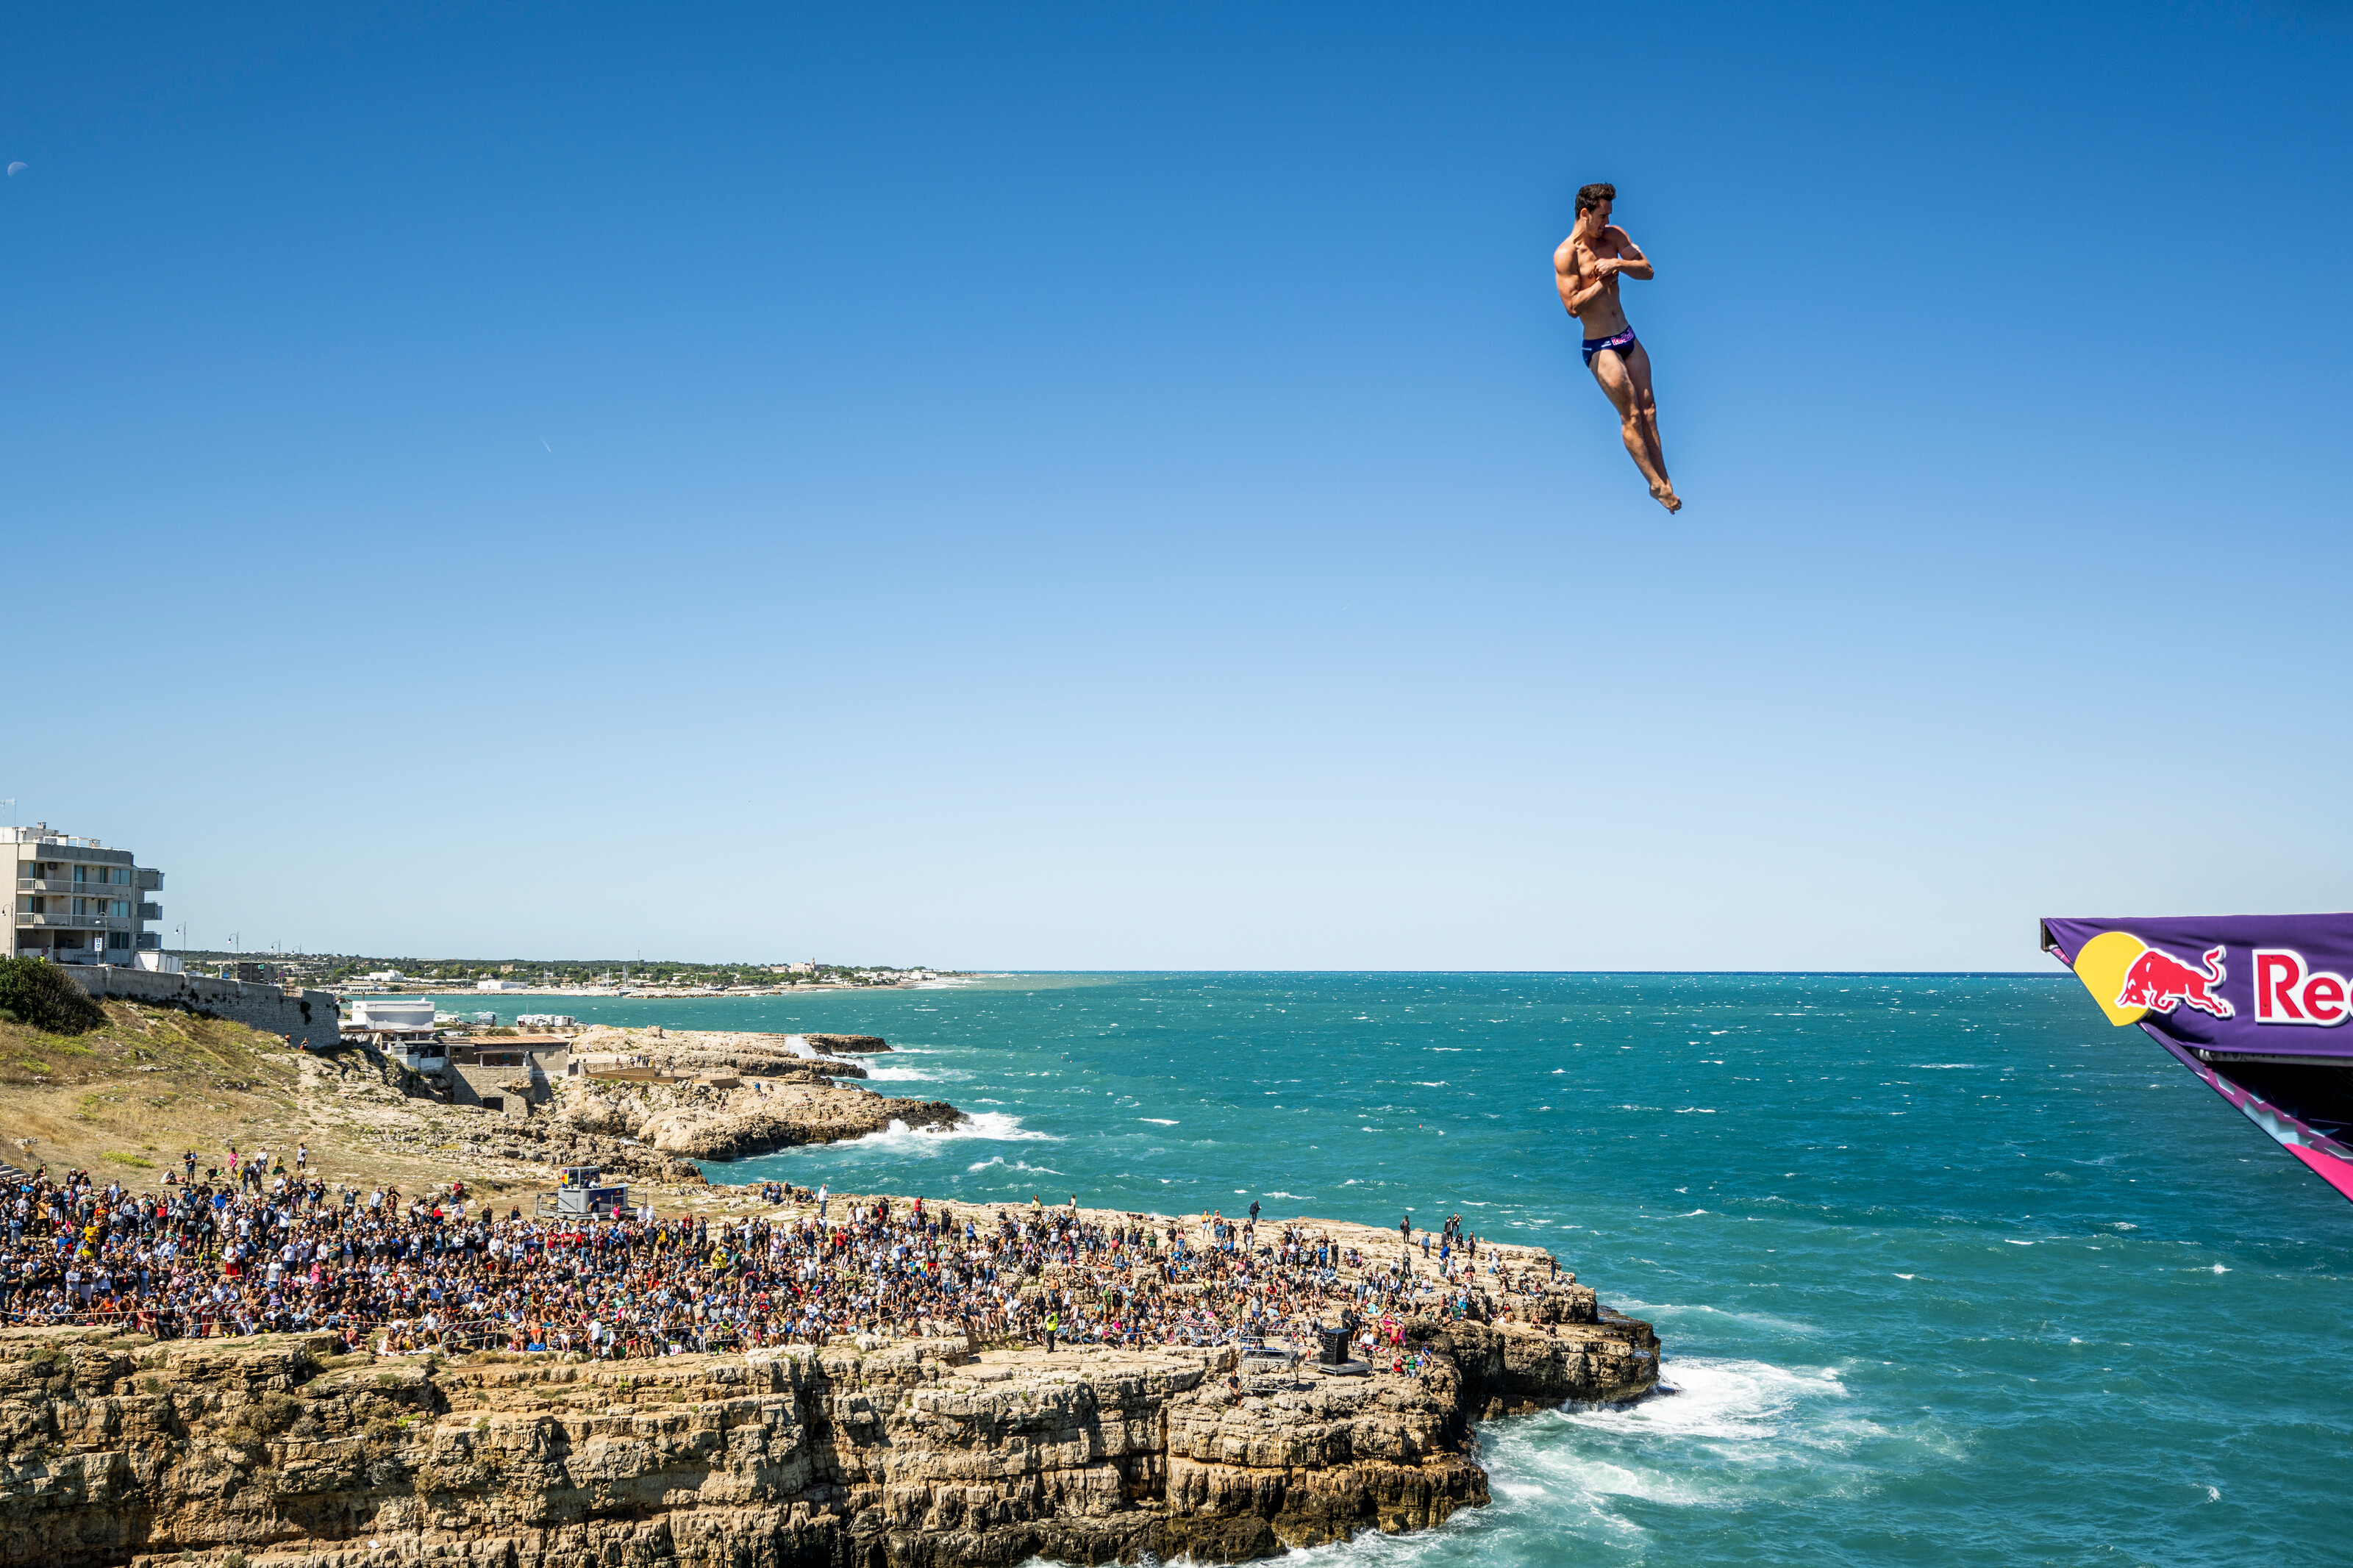 Aidan Heslop dives from the 28 metre platform during the final competition day of the seventh stop of the Red Bull Cliff Diving World Series at Polignano a Mare, Italy. 